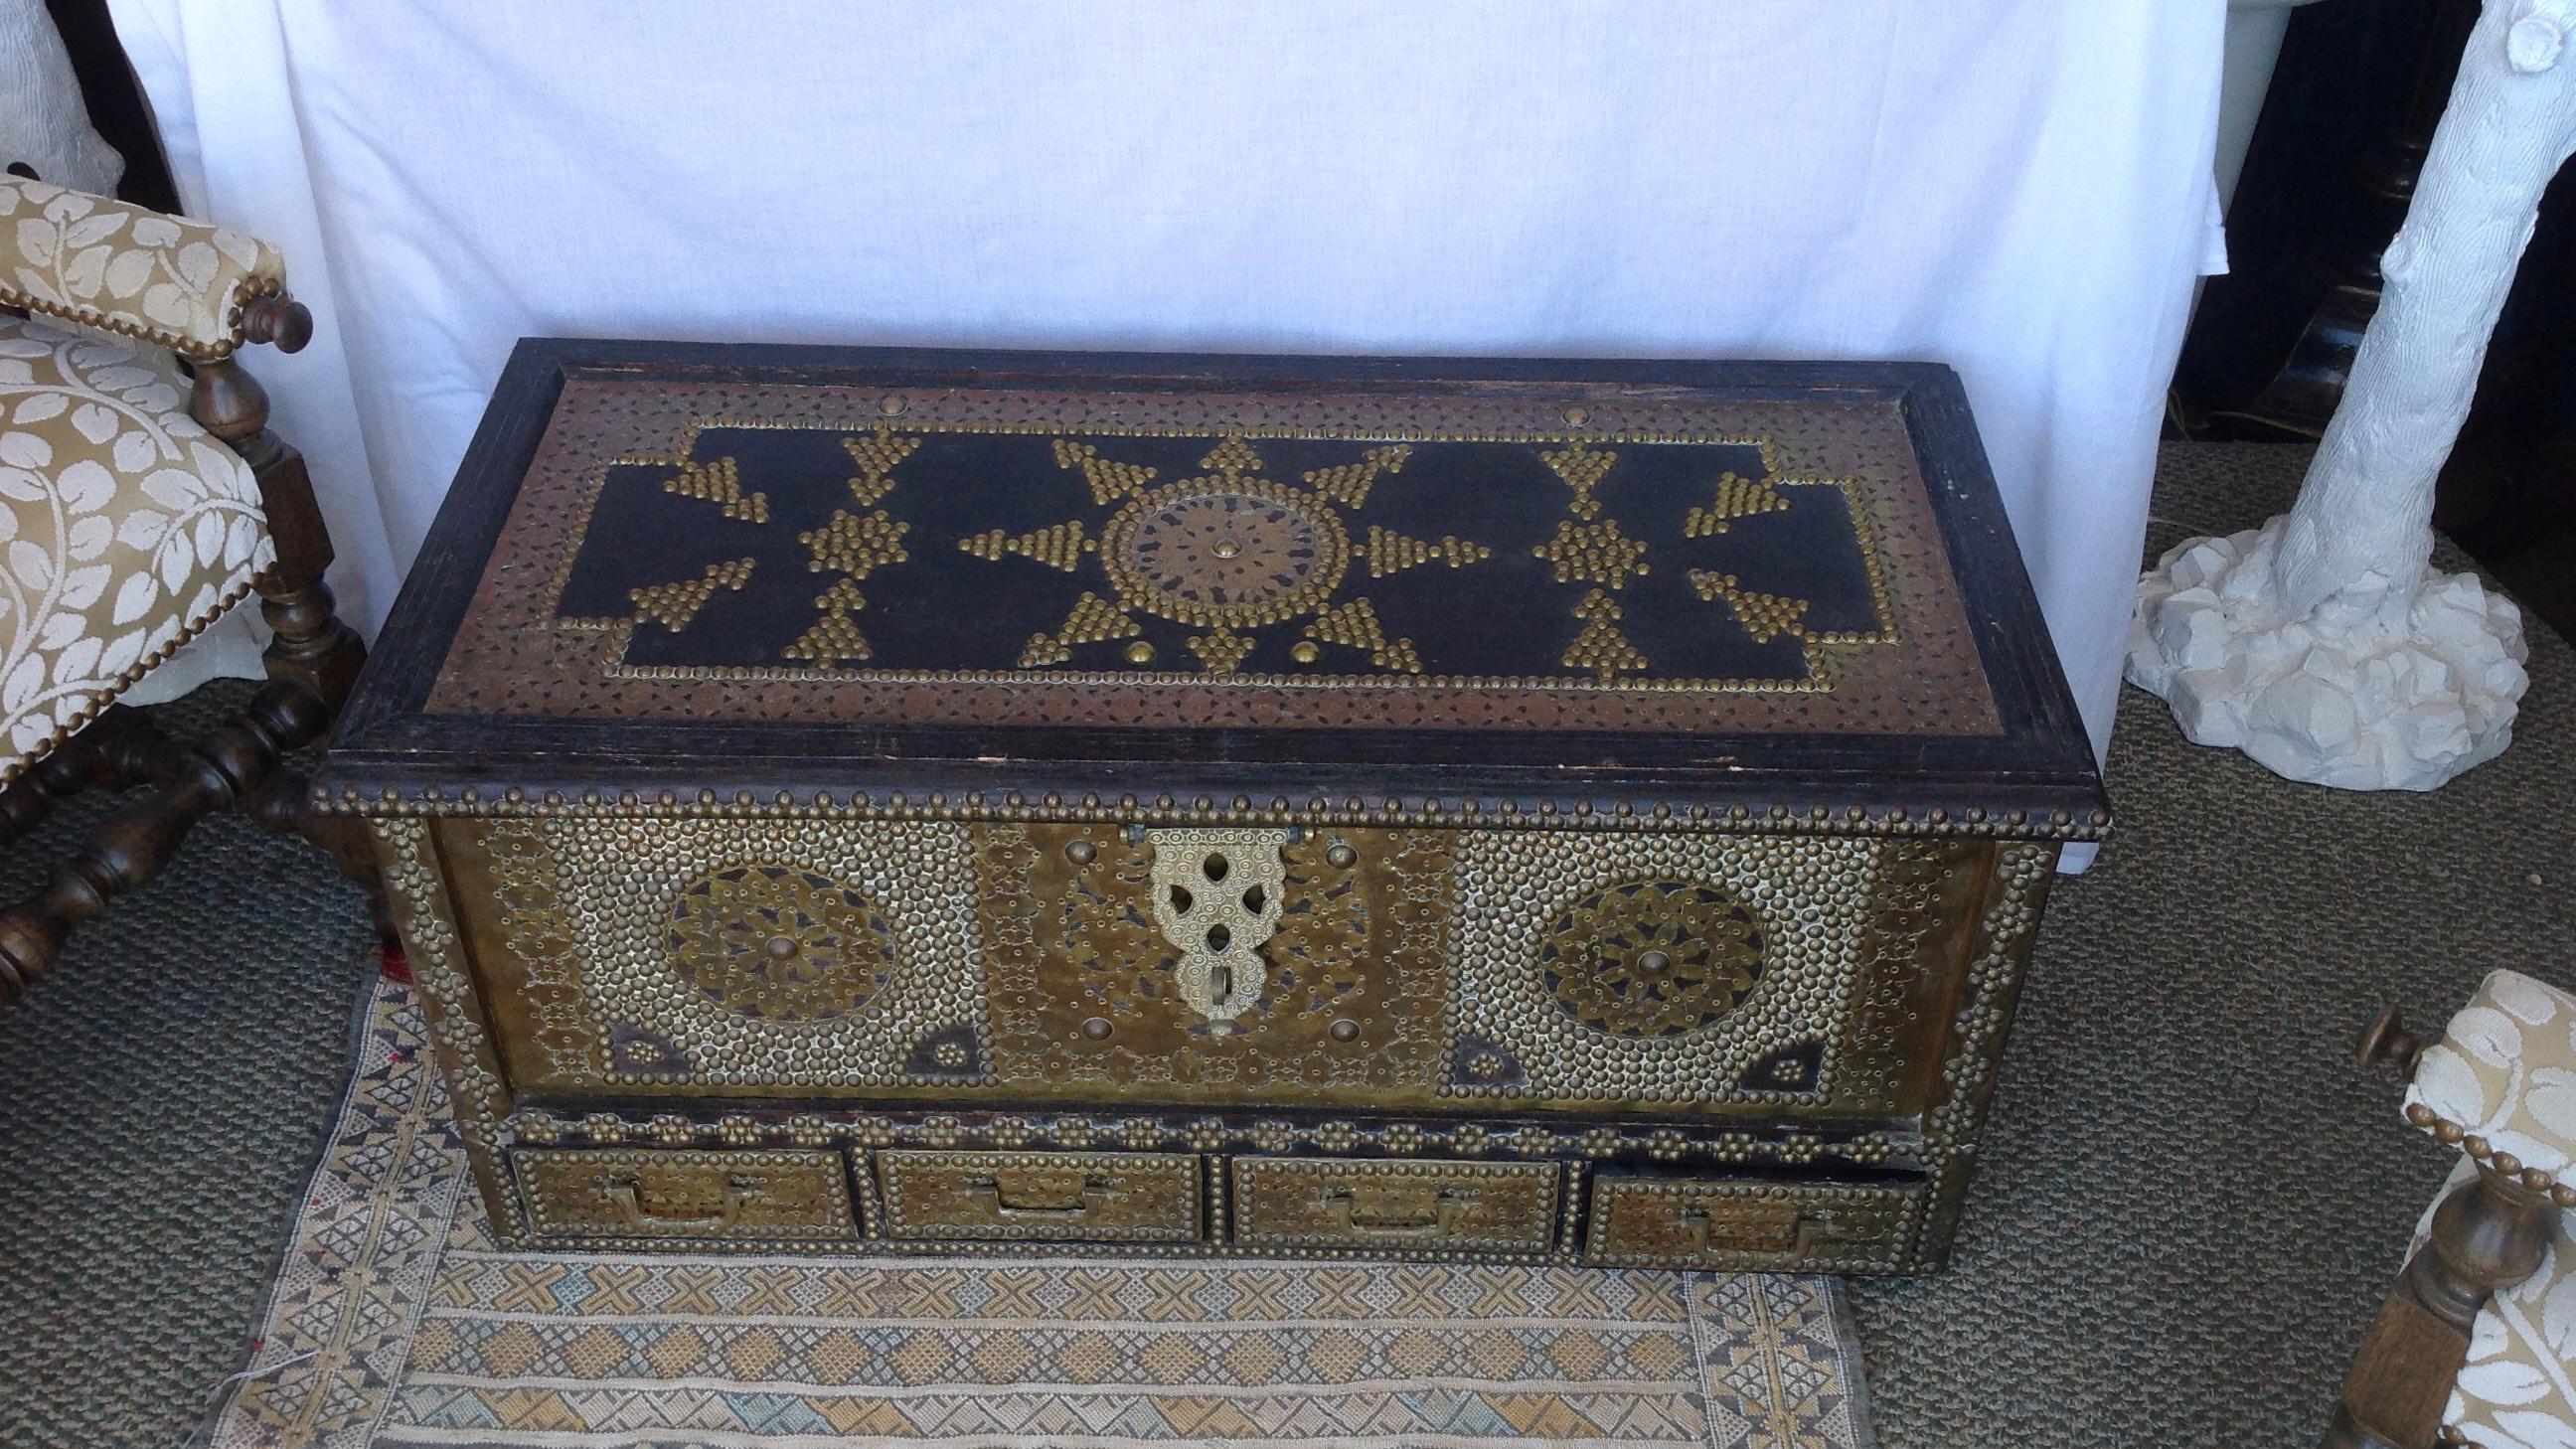 Fashioned with elaborate applied brass work, nail head design as well as brass 
handles - the trunk is also designed with four bottom drawers and has 4 attachable 
feet to raise the trunk off the ground.